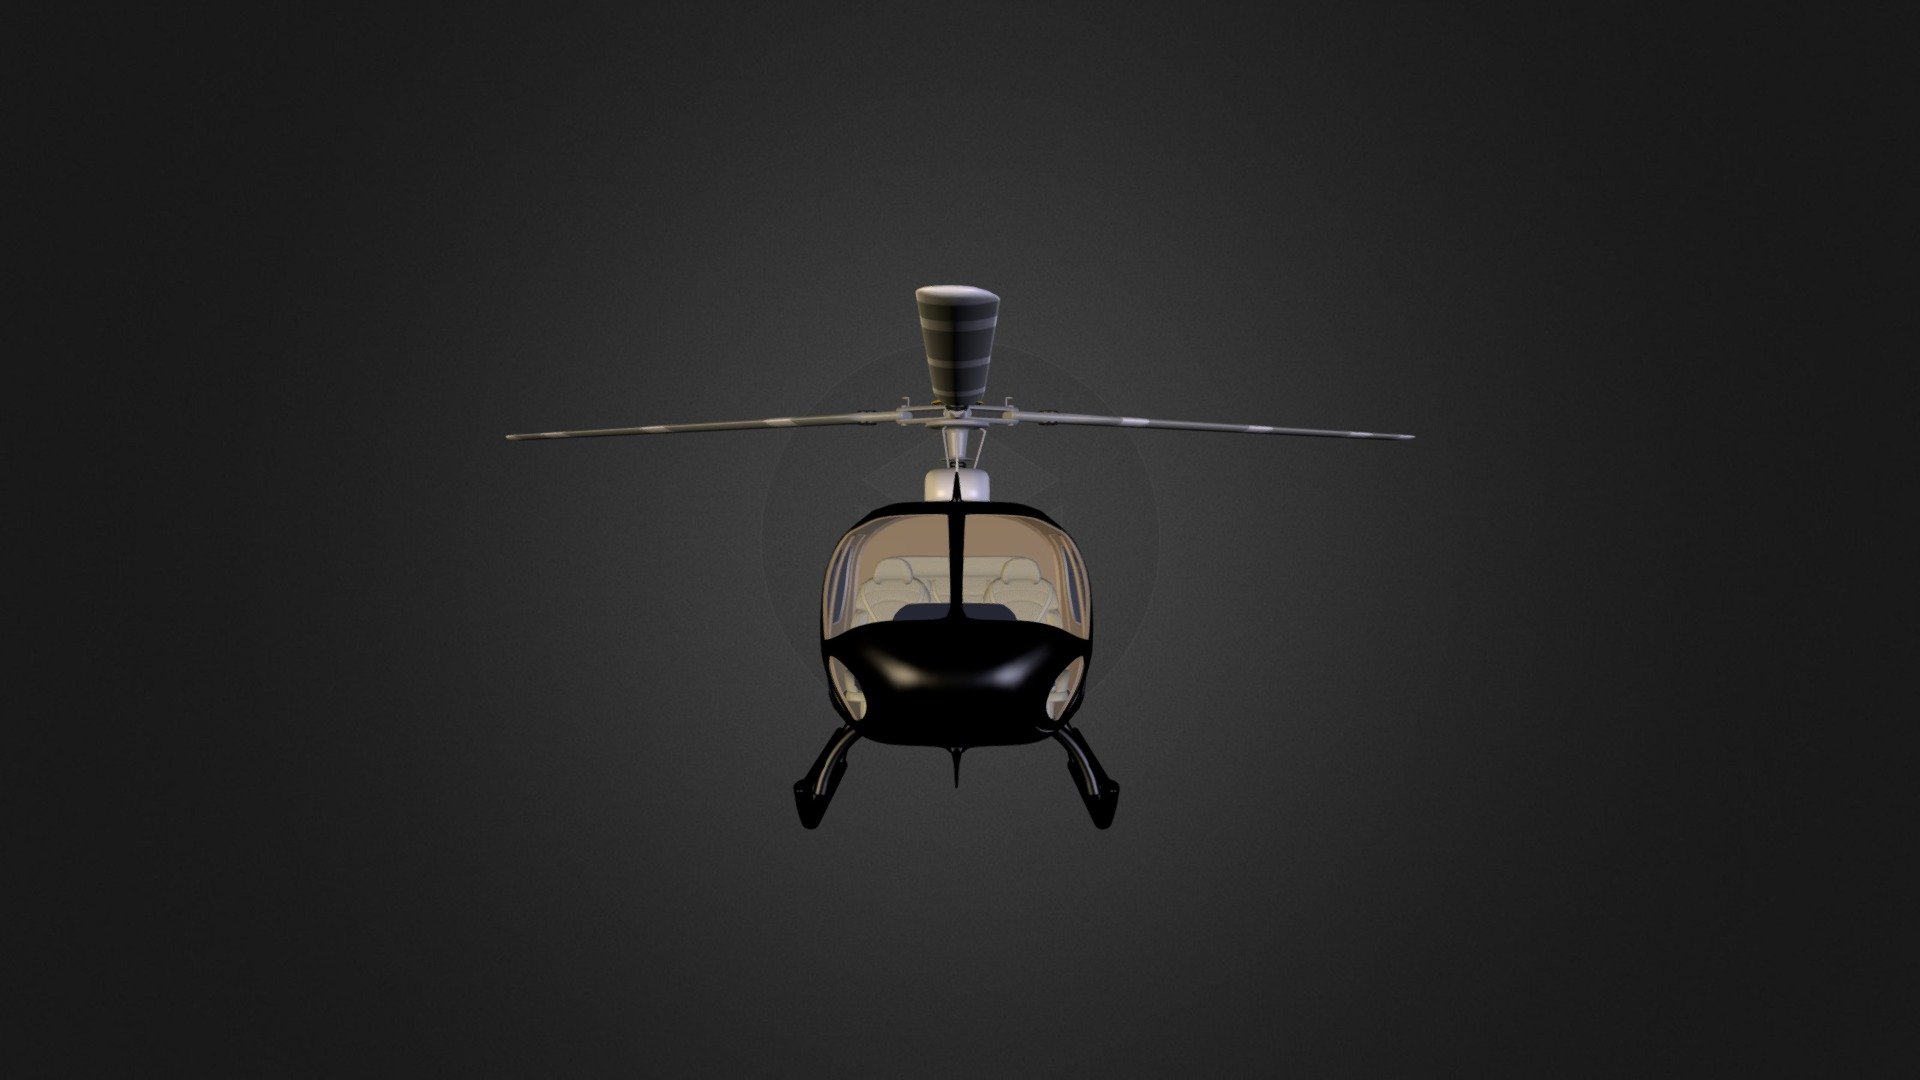 This is a realistic high poly eurocopter helicopter Police - Eurocopter Police - 3D model by Acharya Hargreaves (@acharyaD) 3d model